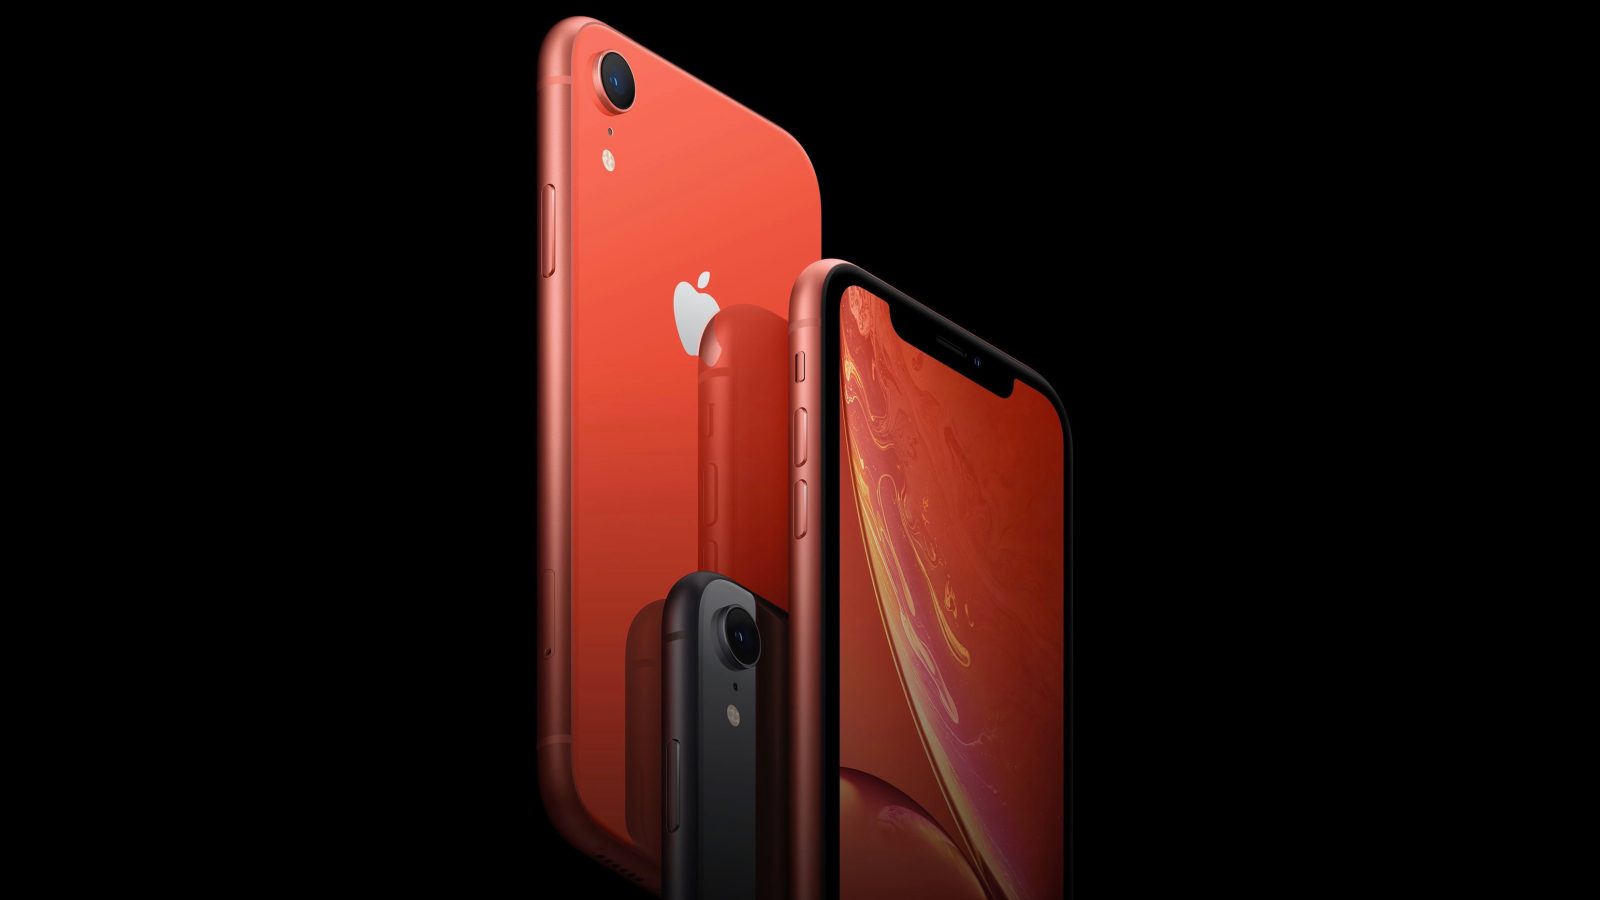 Download the iPhone XR wallpapers here Gallery - 9to5Mac